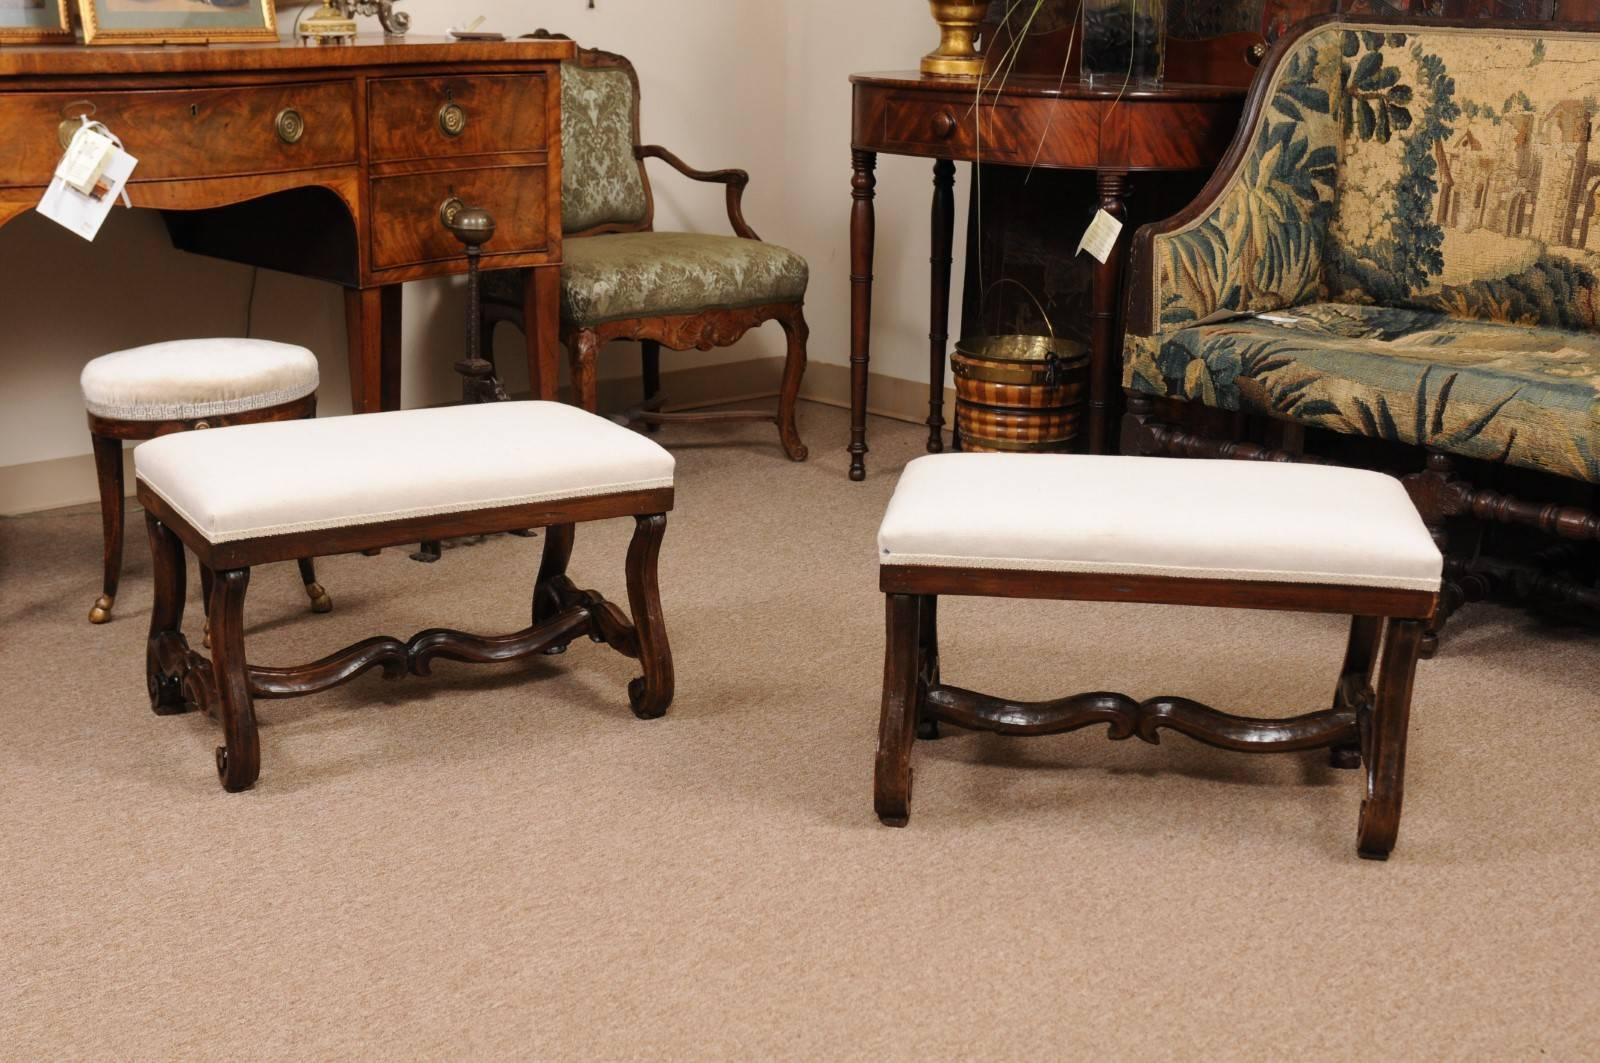 The pair of 18th century Italian walnut benches with linen upholstered seats and carved 